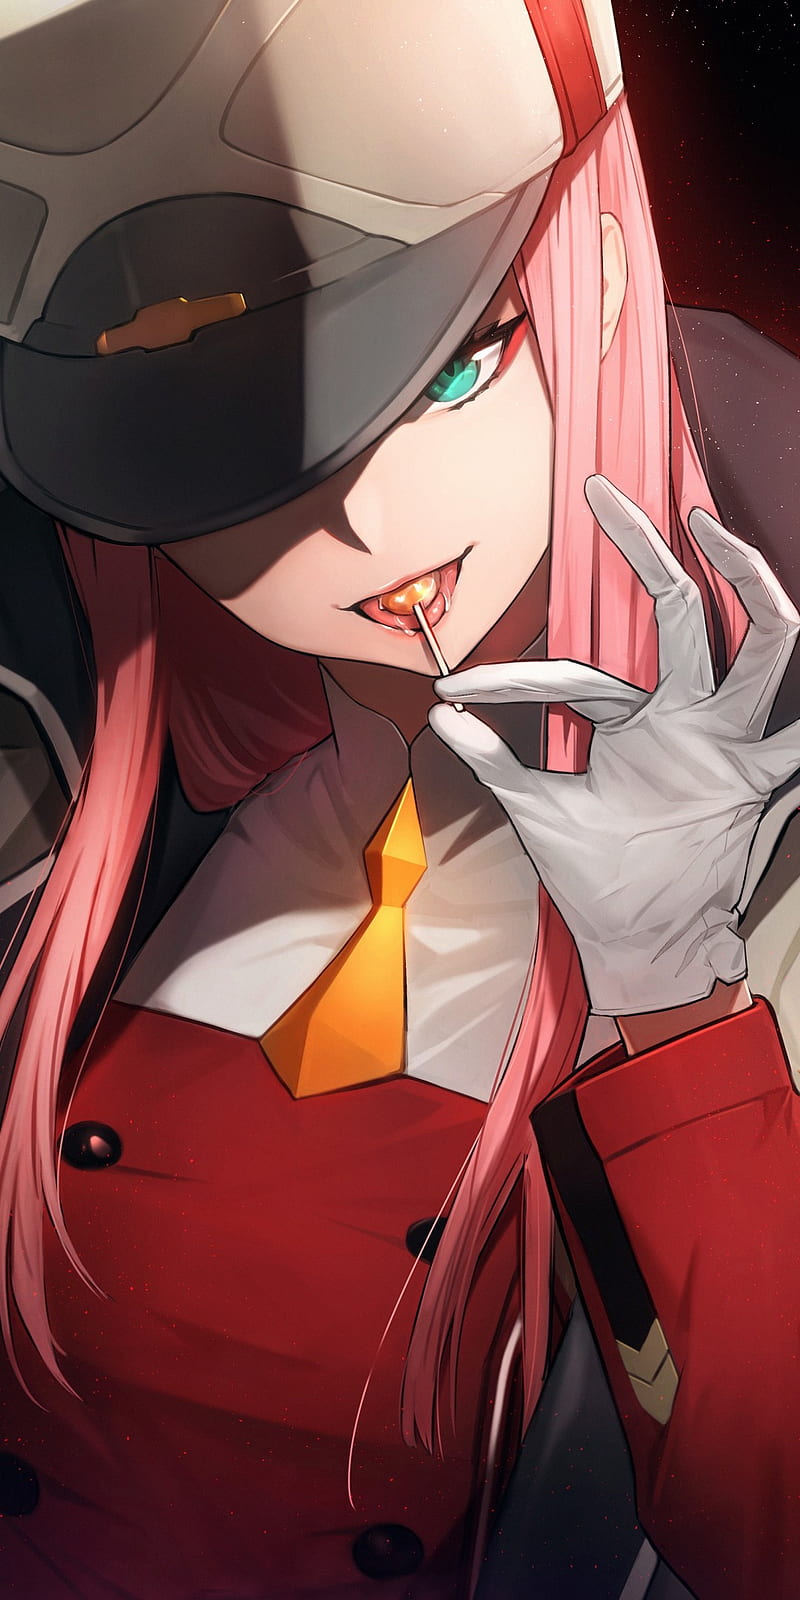 Anime 1920x1080 Darling in the FranXX darling in franxx Code: 002(02) | Anime  wallpaper, Anime, Anime backgrounds wallpapers